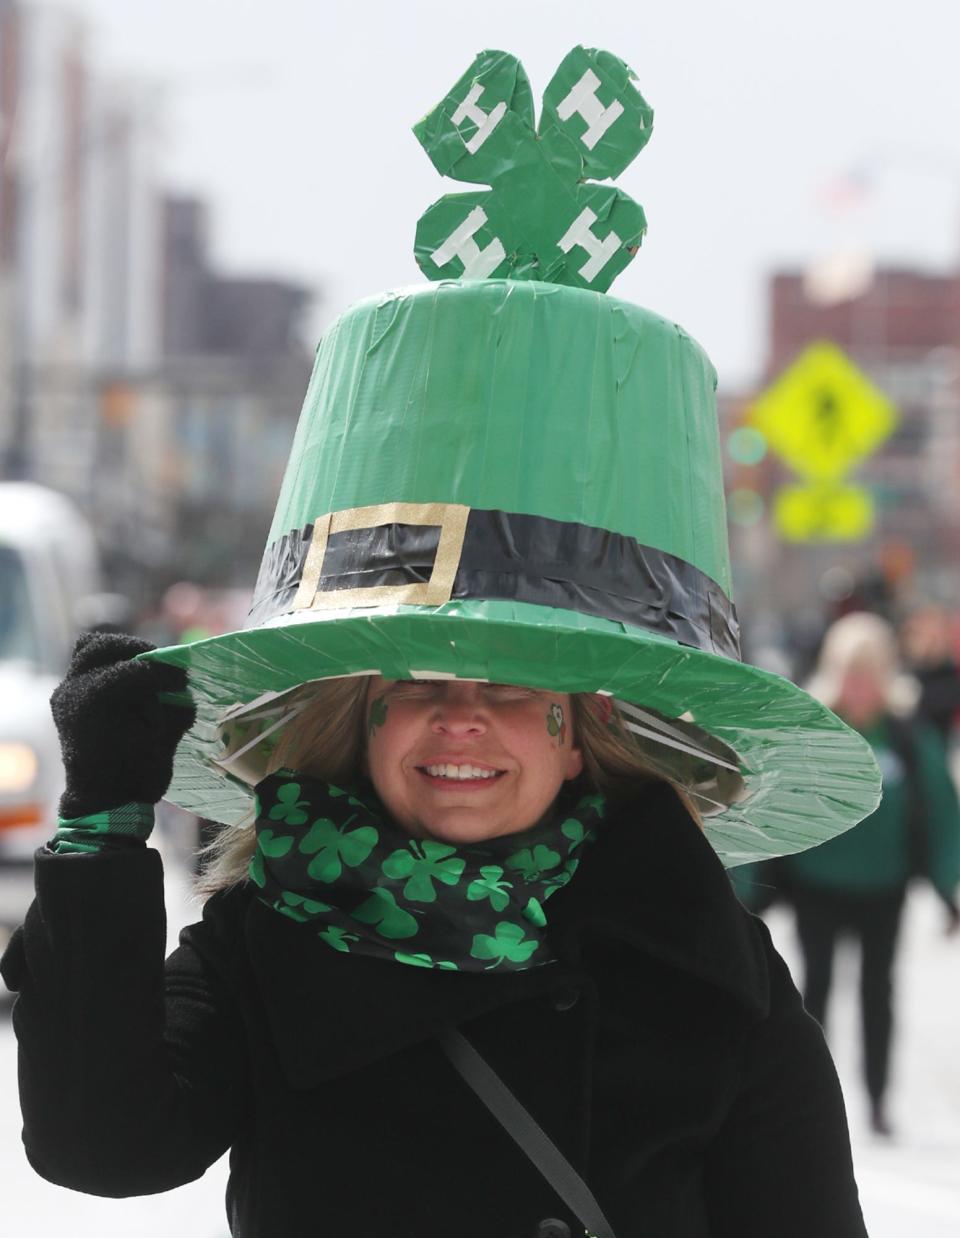 Gretchen Knapp wears an oversized 4H hat as she marches in The St. Patrick's Day Parade on Main Street in Akron.